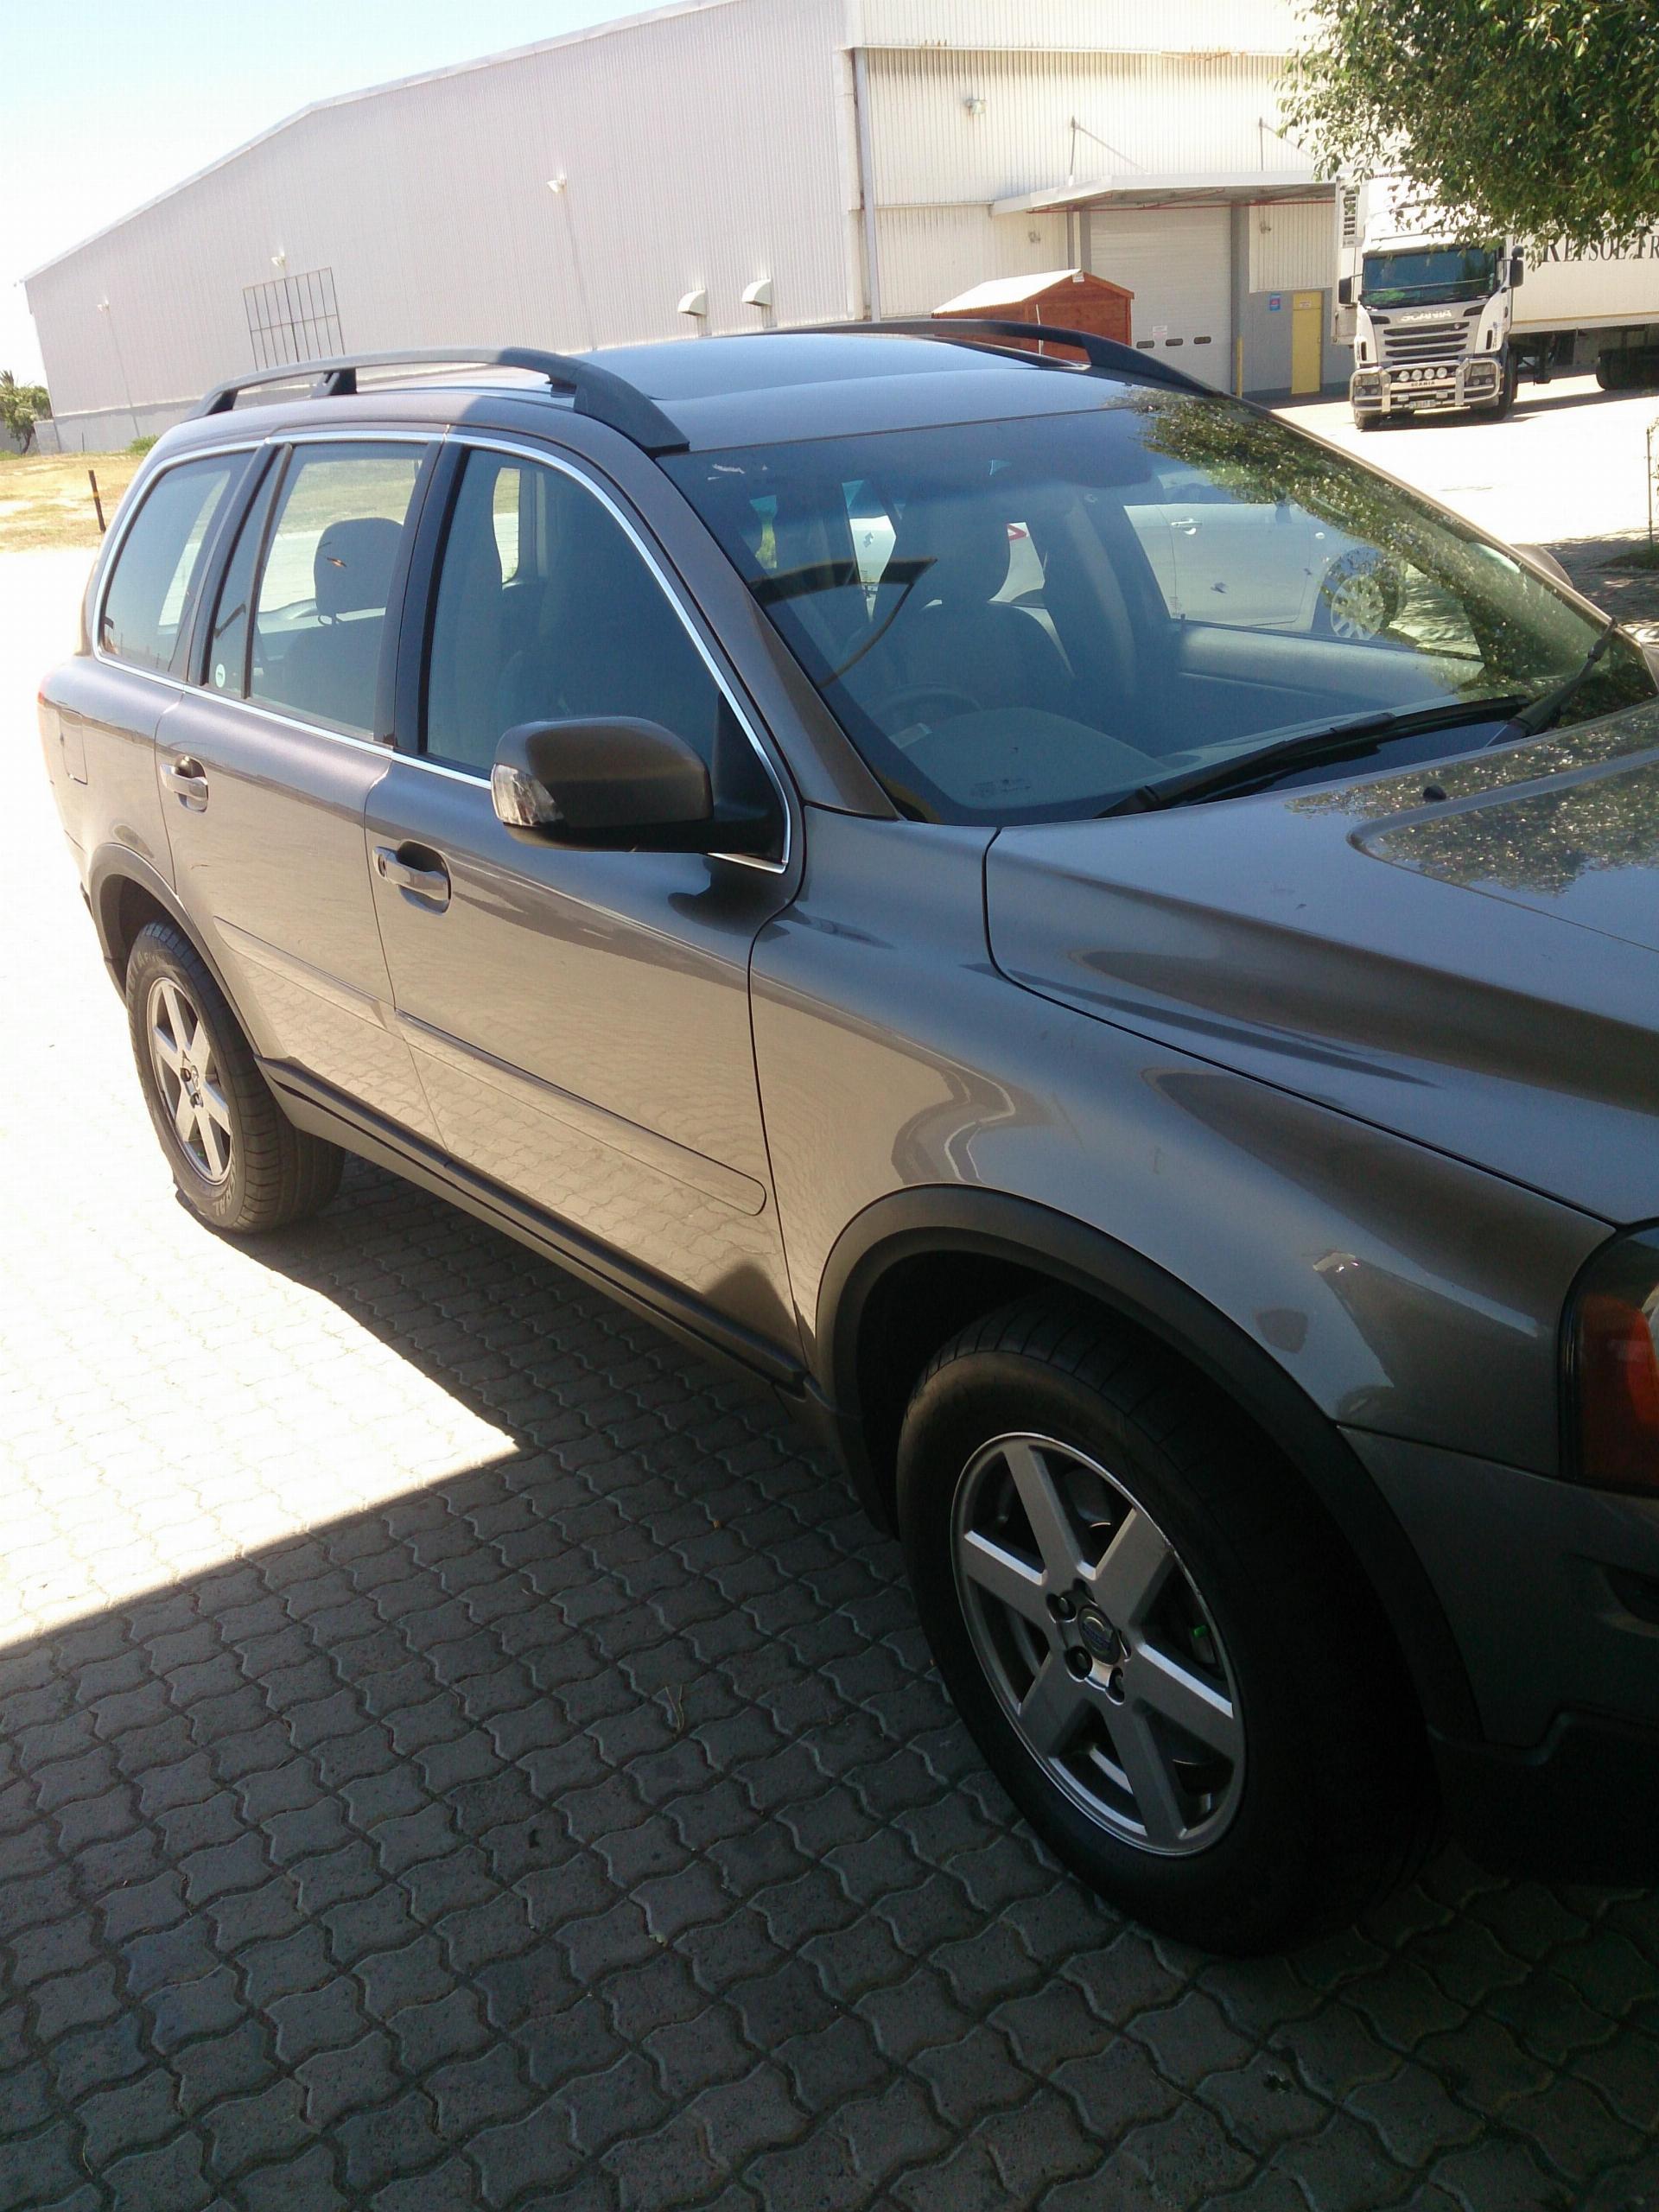 Volvo XC90 I'M The 2ND OWNER, Metallic Brown